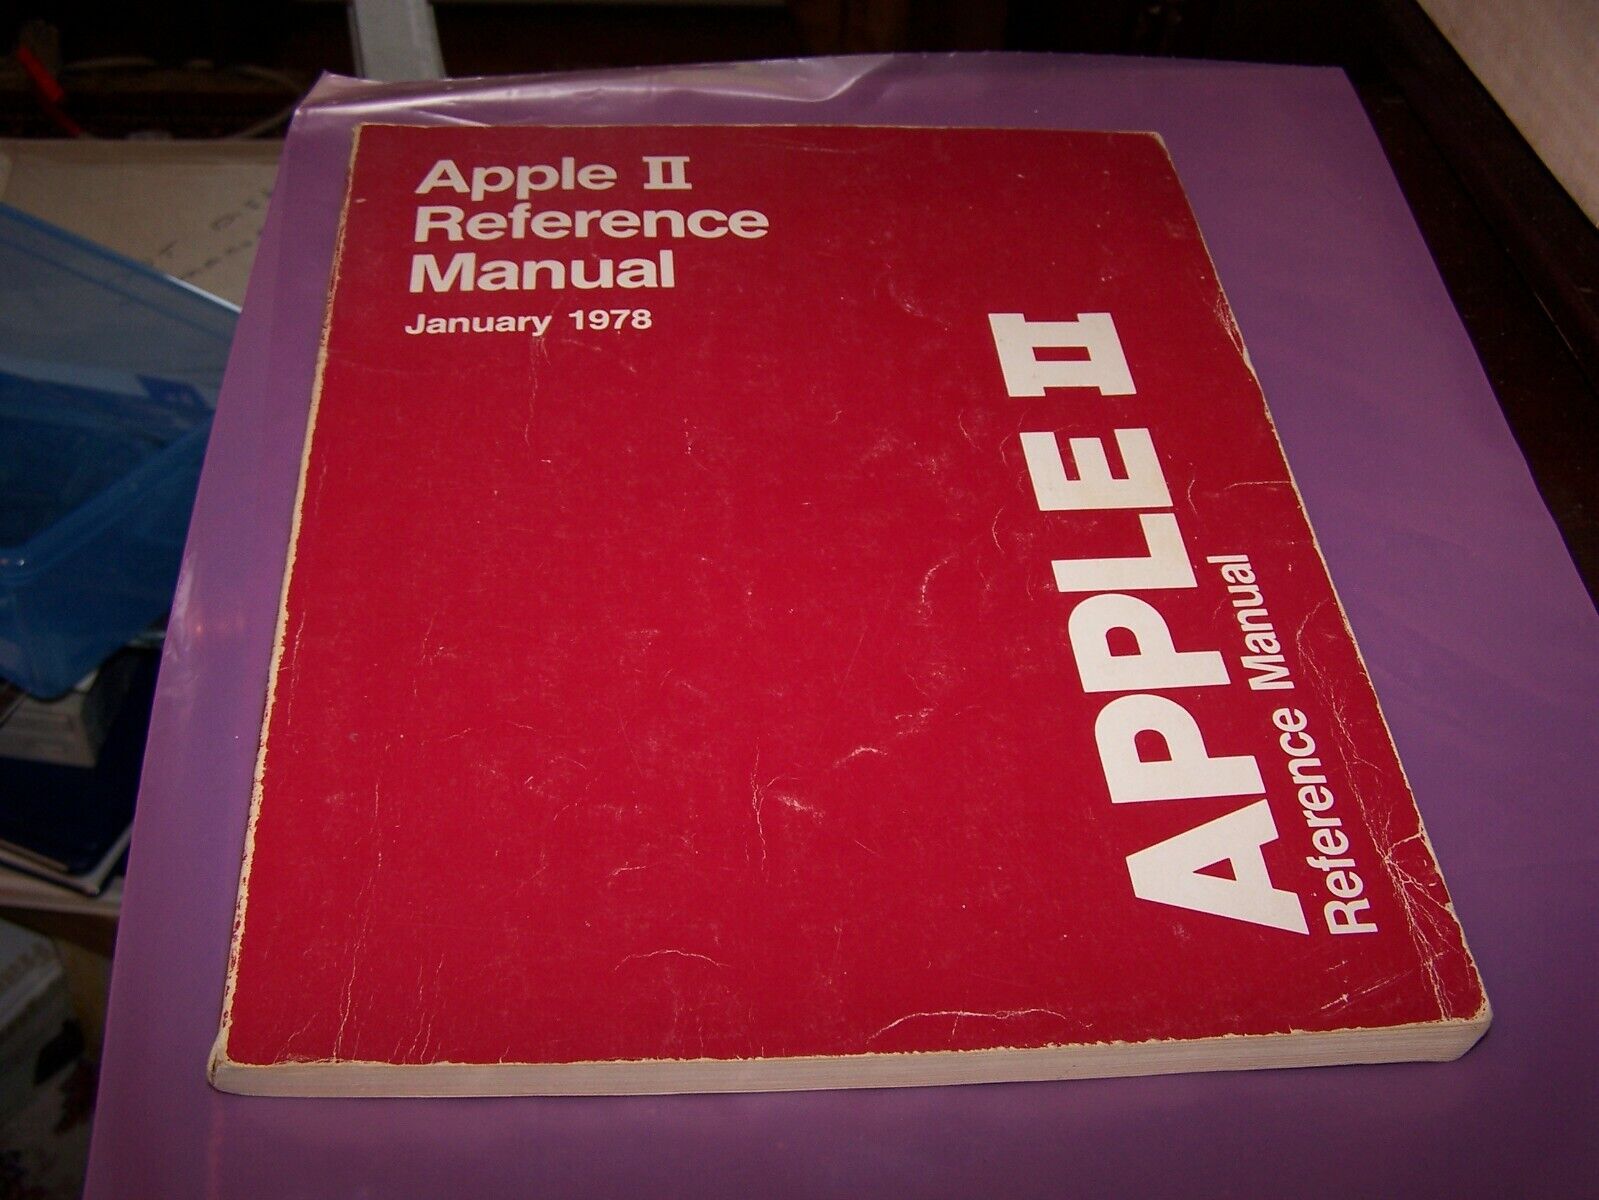 Apple II Reference Manual The Red Book January 1978 P/N 030-0004-00